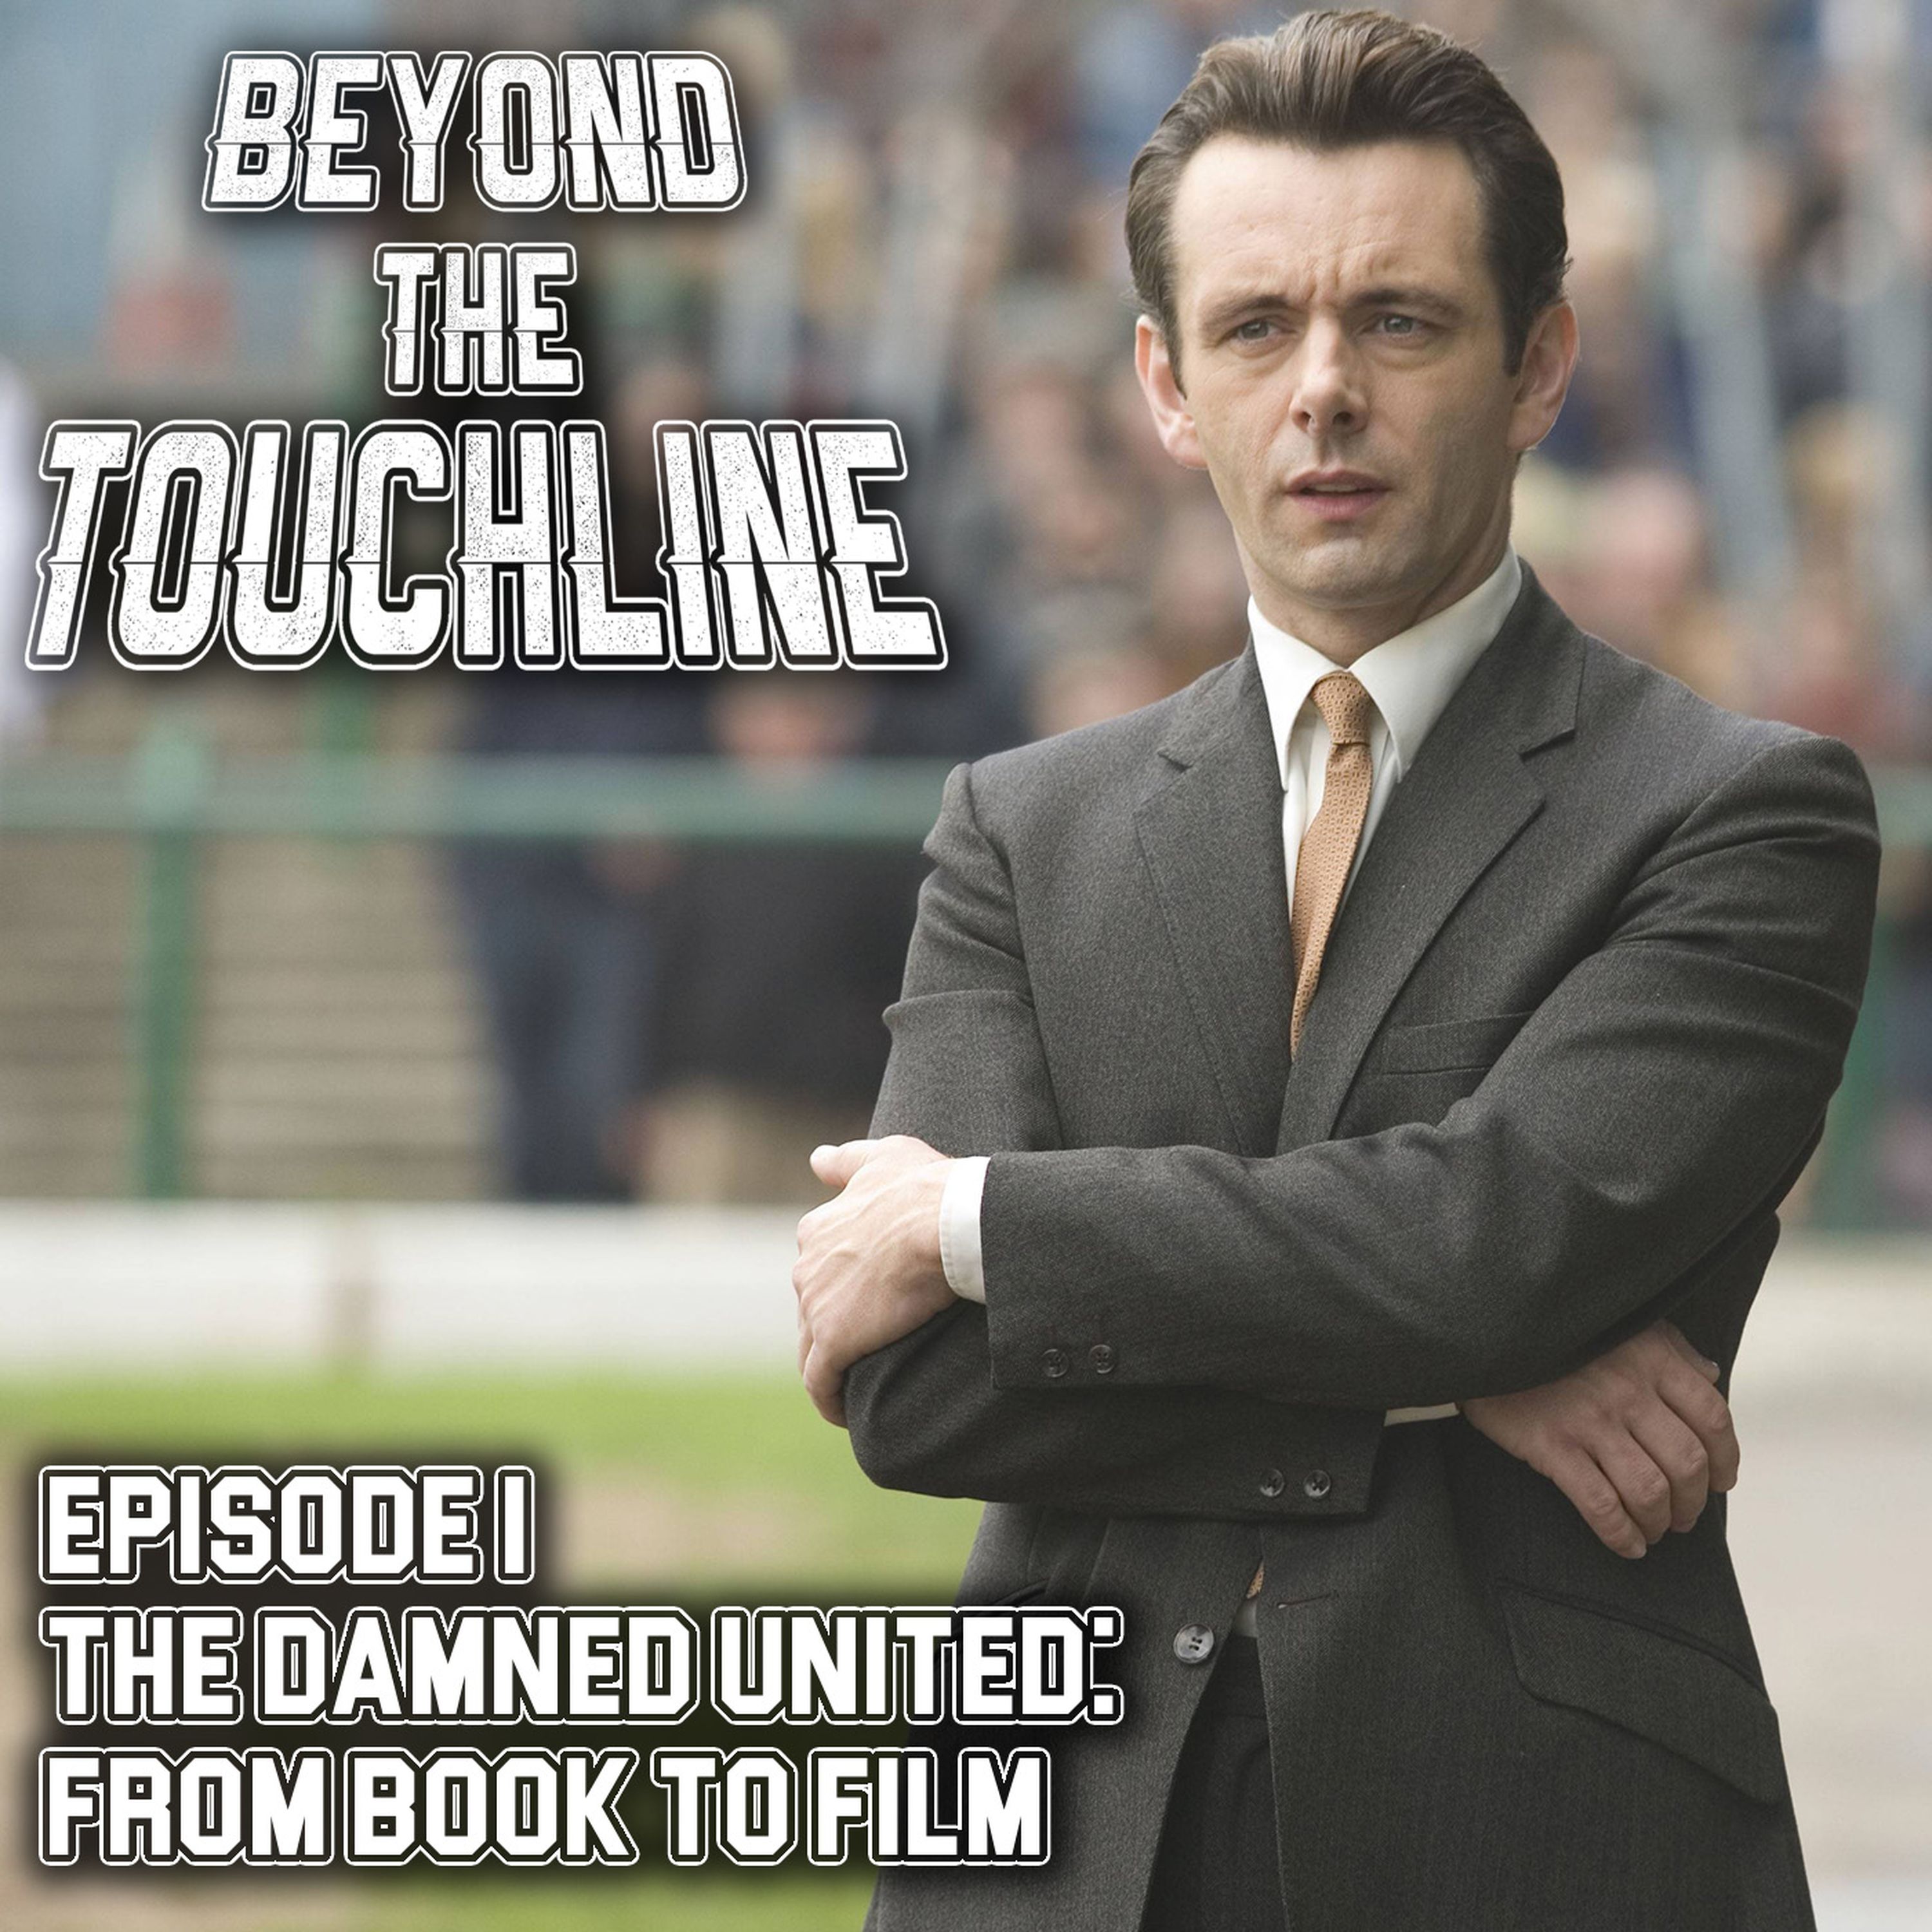 The Damned United: From Book to Film